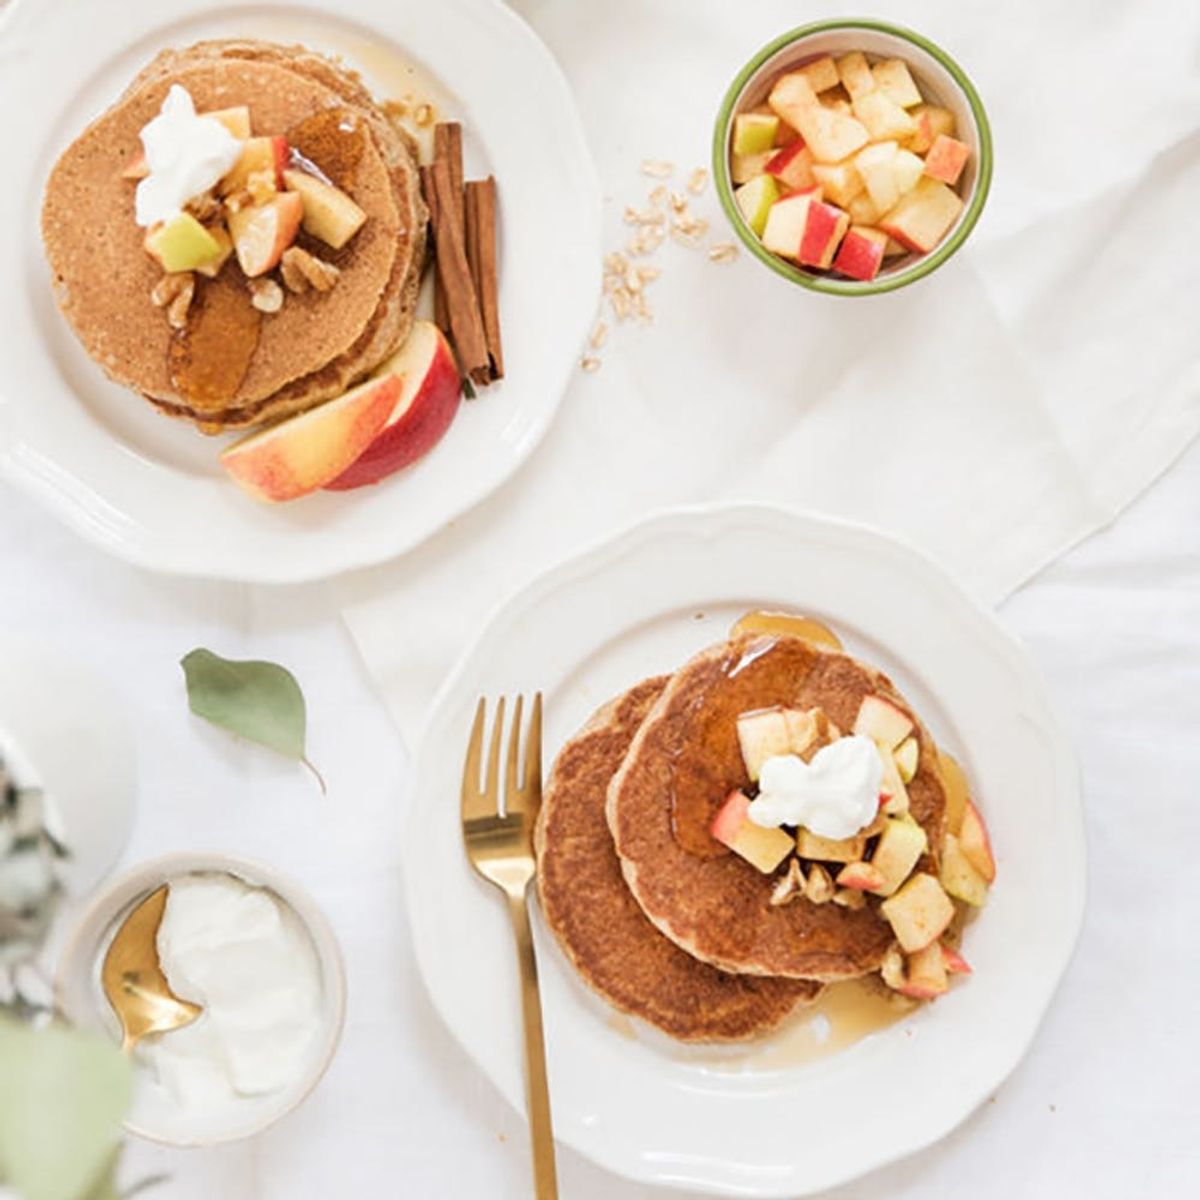 Make Today GREAT With 2 Delicious Breakfast Recipes